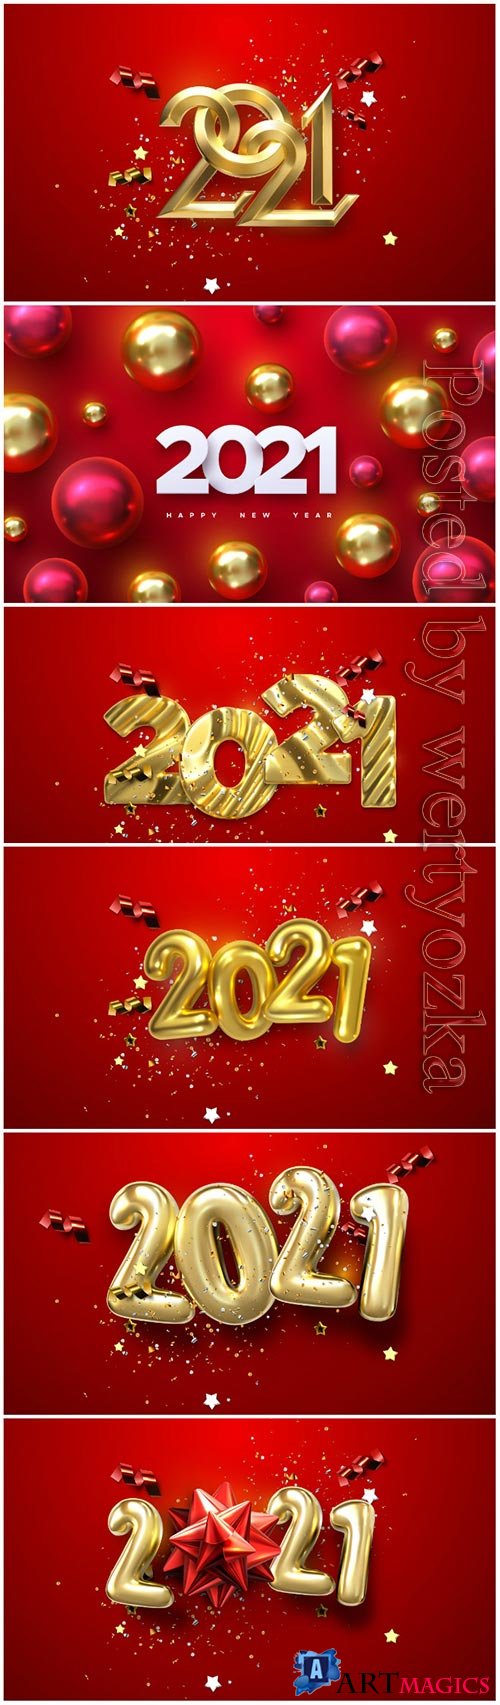 Vector numbers 2021 for new year illustration